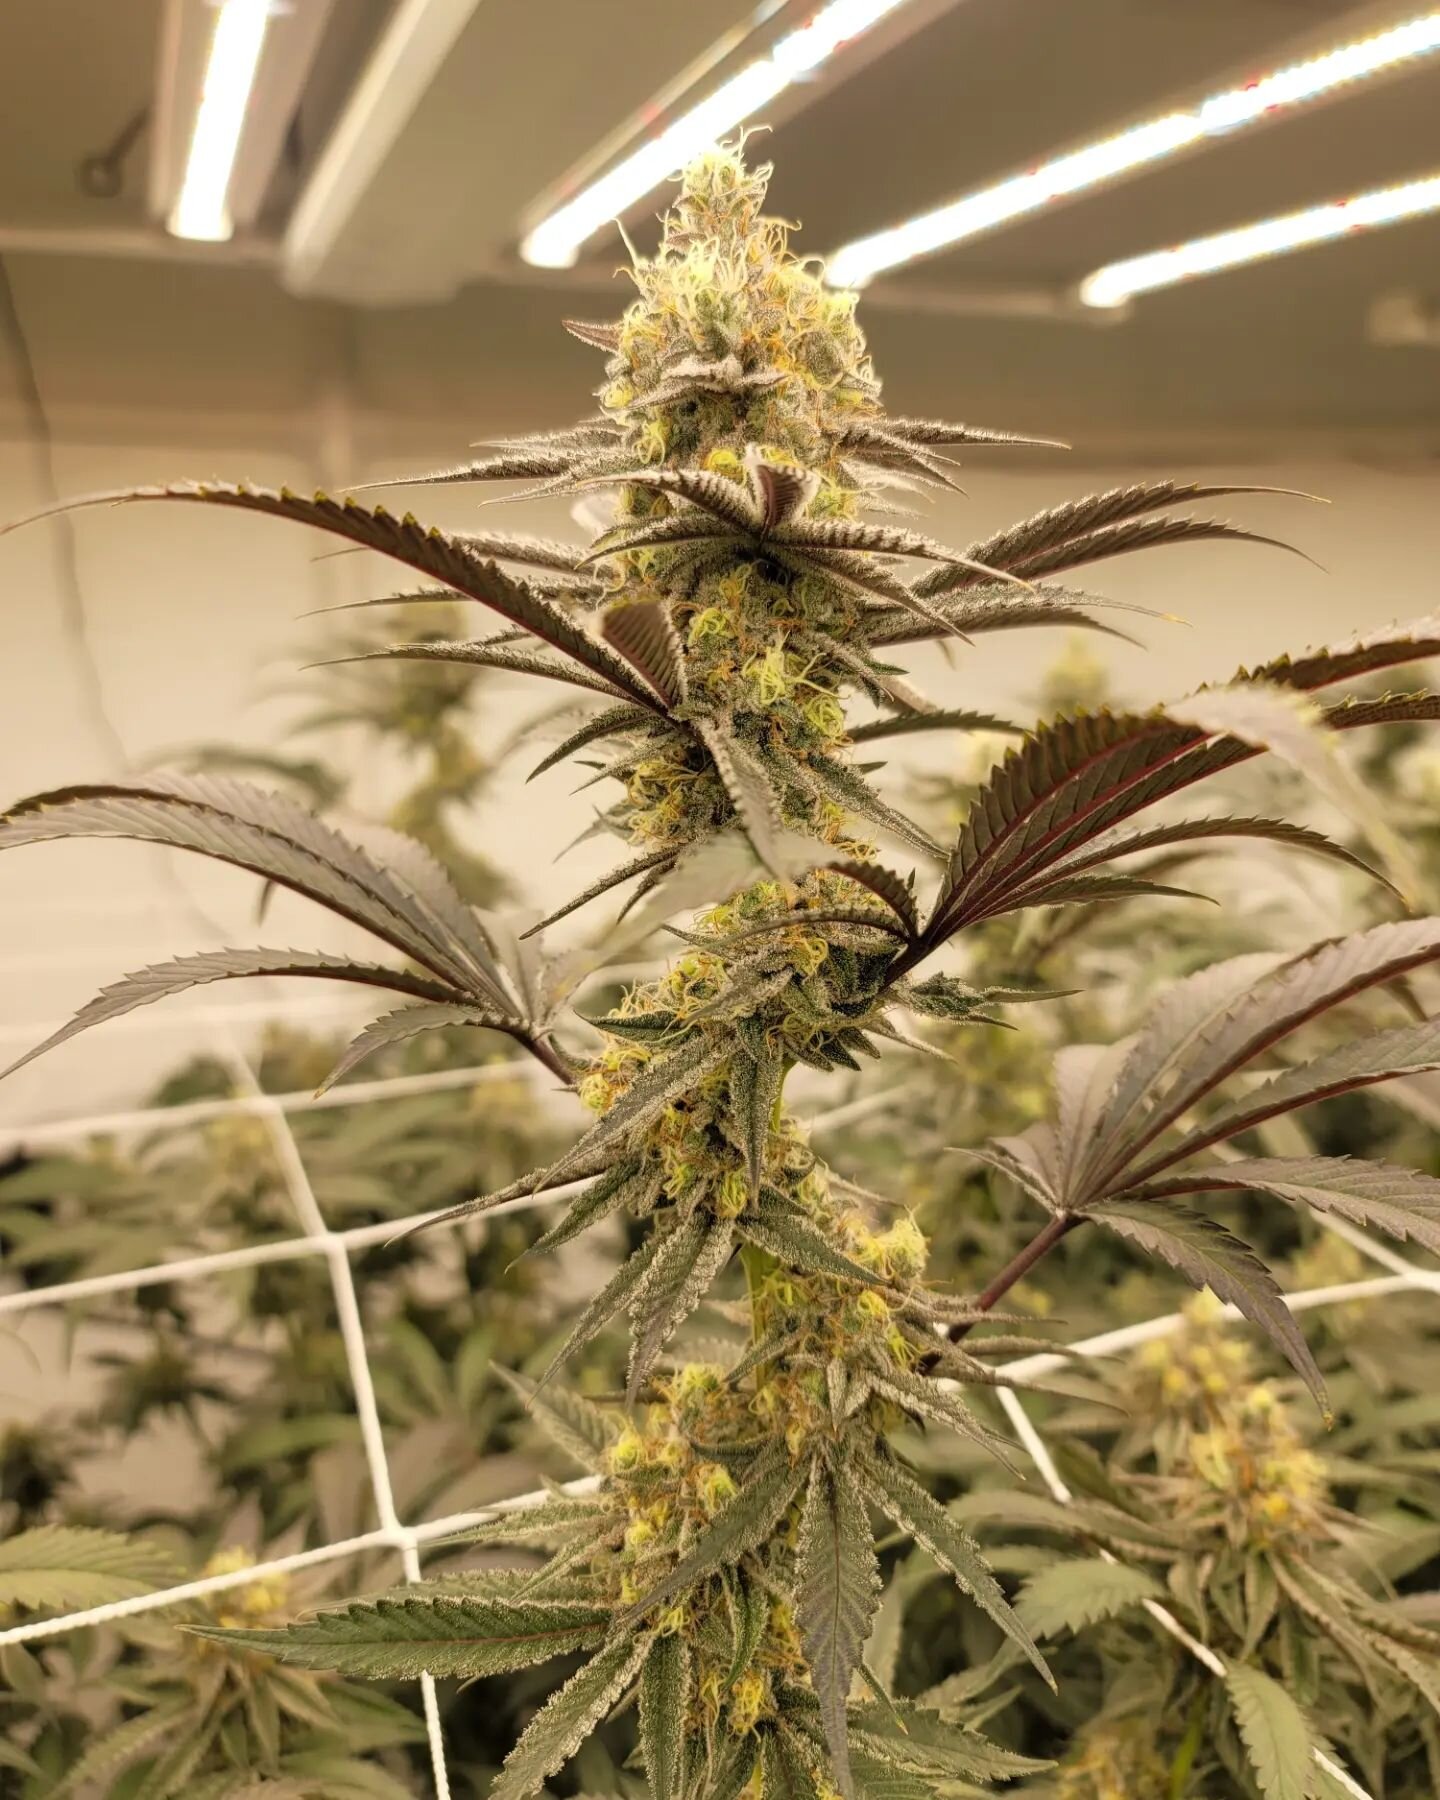 Flower Room week 6 ☀️
.
This run we've got 5 strains on the way:
Megafruit 🫐🥧
Platinum Cake 💿🎂
SuperBoof 🍊🧃
Rubber Match ⛽️
Van Helsing 🧛🧄
.
We've got some exciting news coming very soon that will take this brand to the next level 👀 stay tun